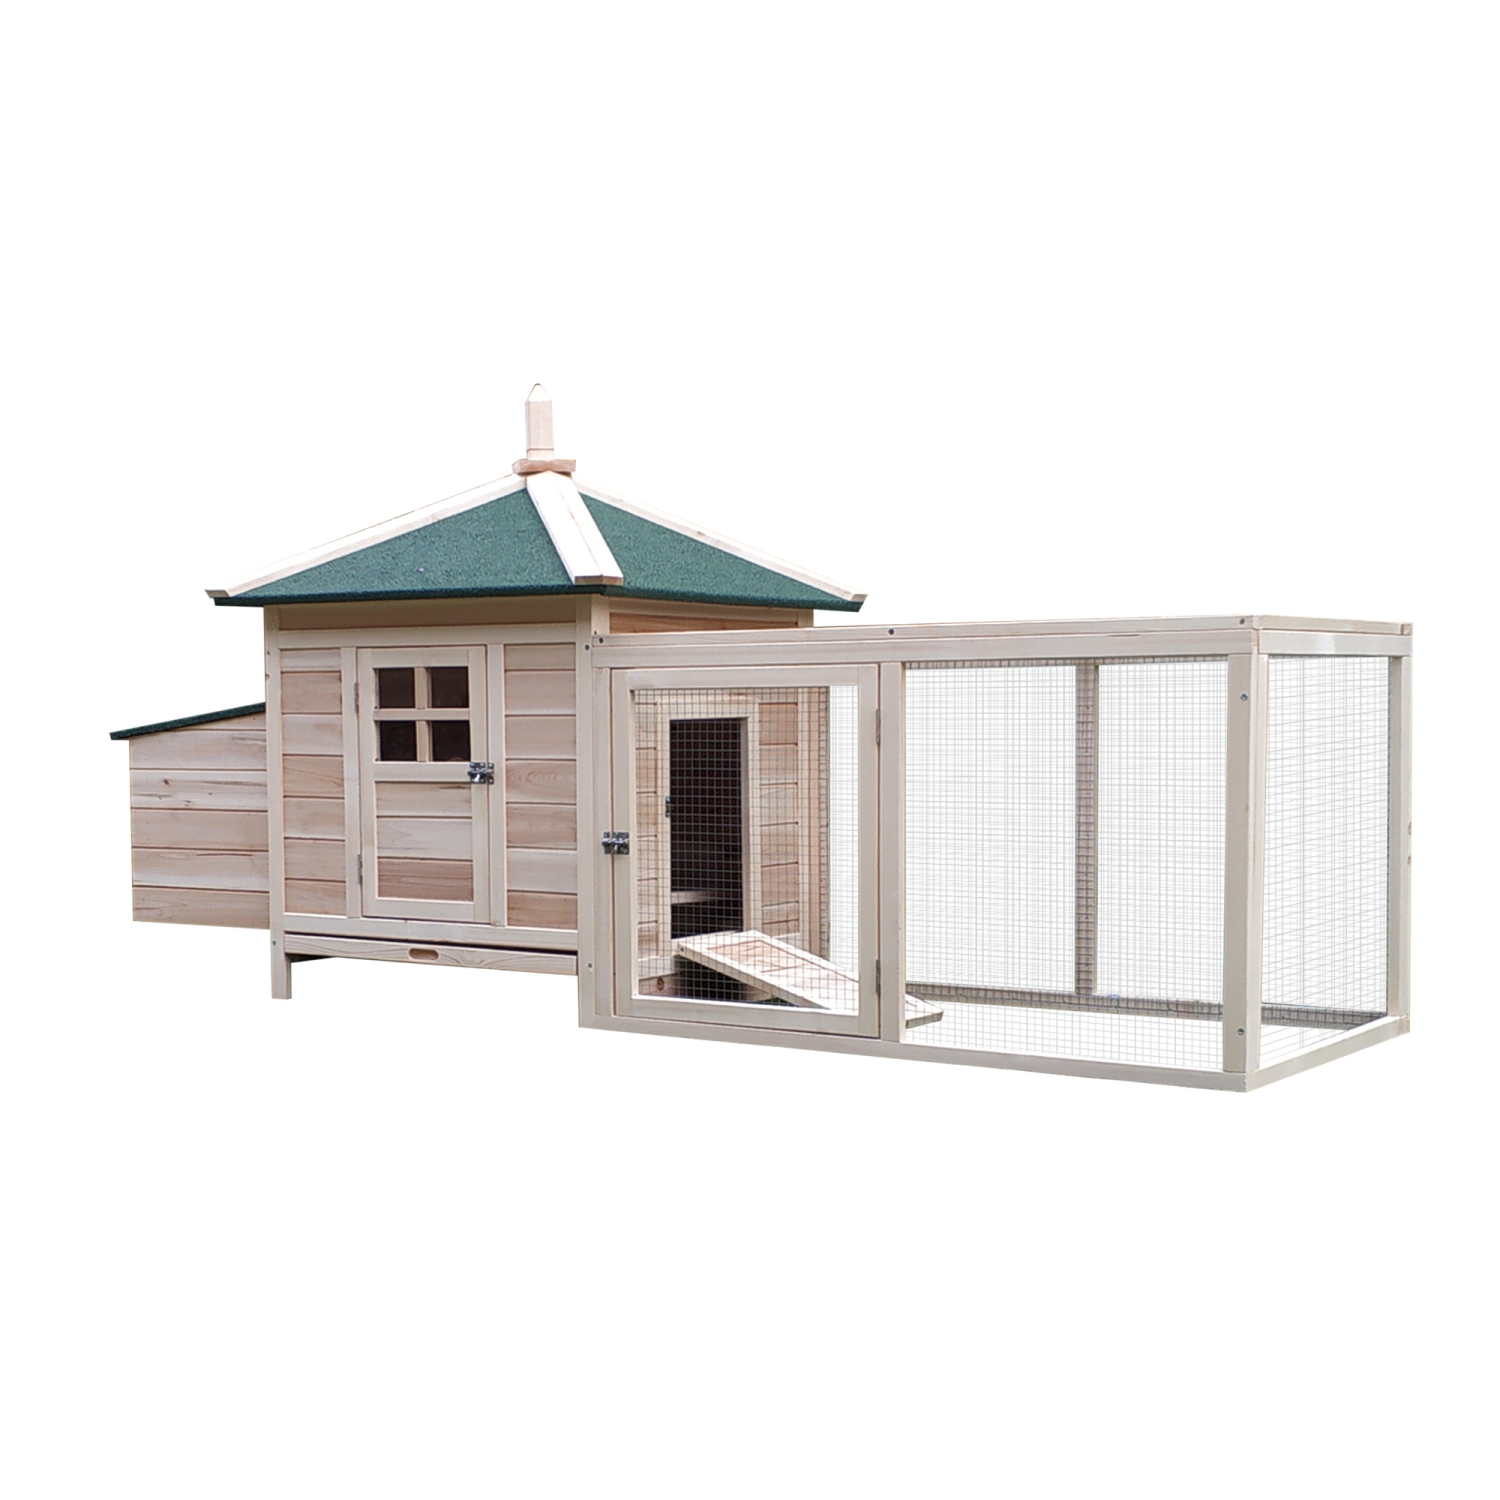 PawHut 77" Chicken Coop Hen House Rabbit Hutch Poultry Cage Pen Outdoor Backyard with Nesting Box Run Natural